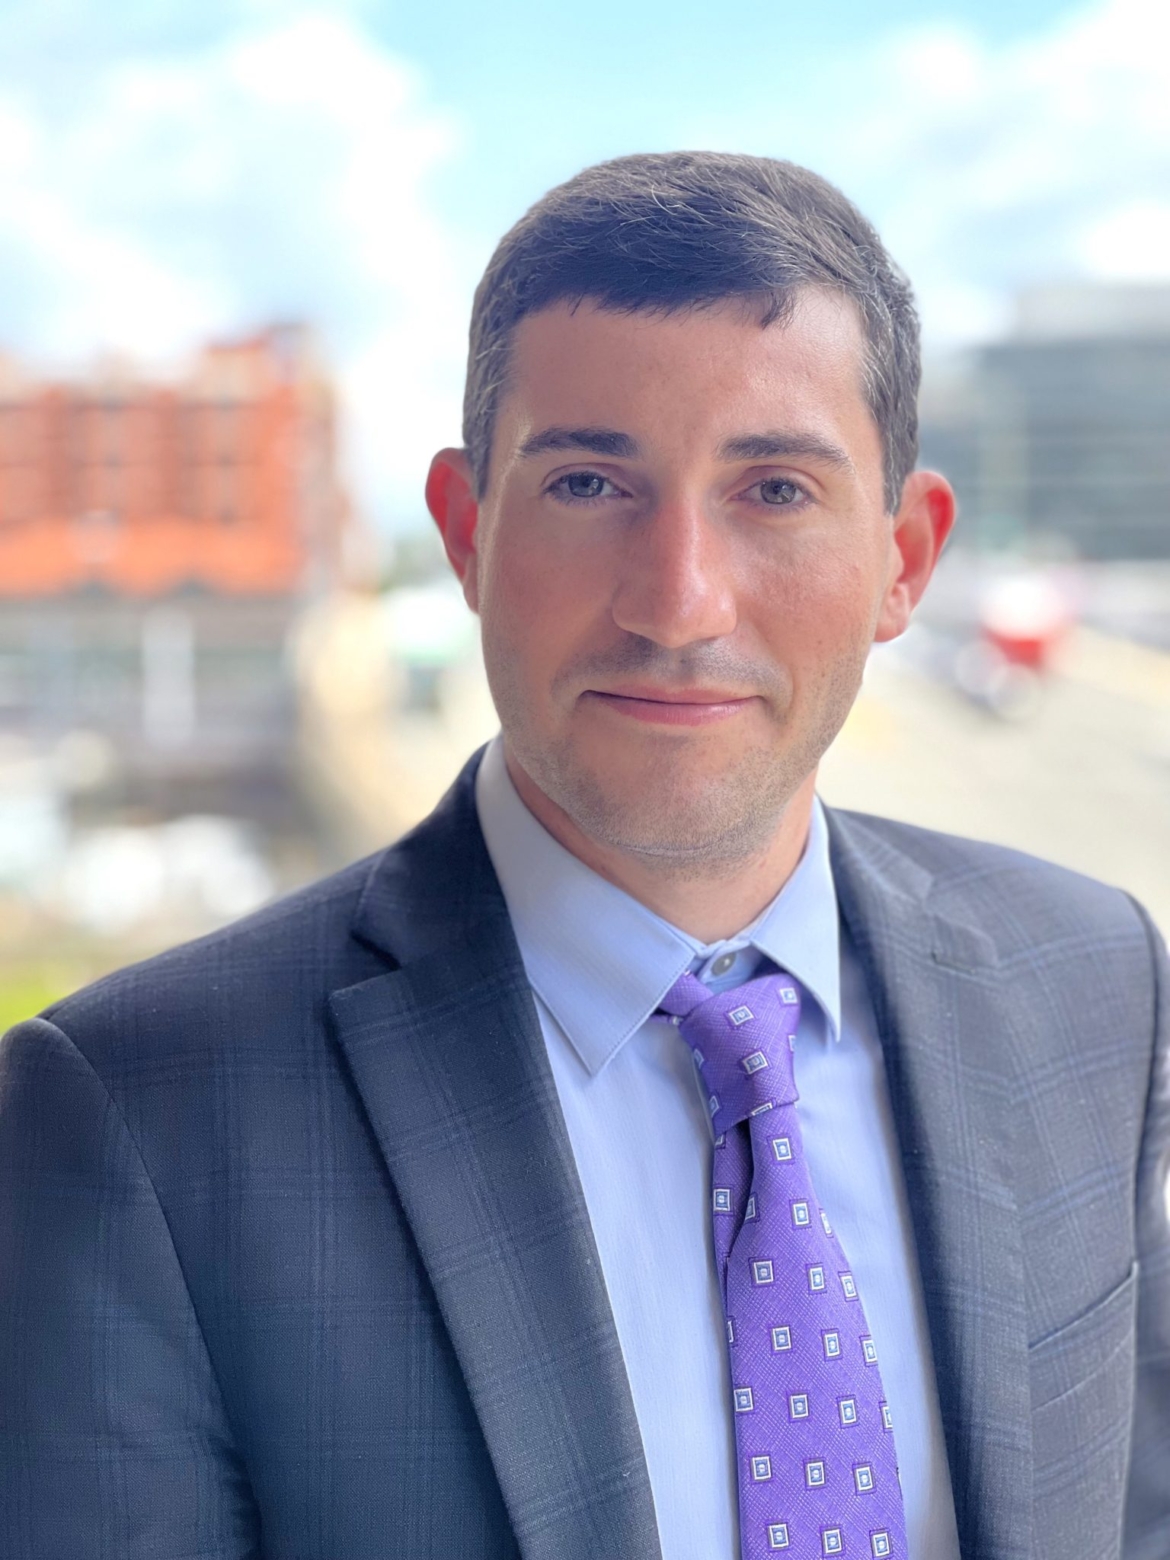 Portrait of Cory Bernstein. Cory is a white man with dark hair and brown eyes wearing a dark gray suit with a faint purple pattern, a blue dress shirt, and a purple tie patterned with silver and blue squares. He is standing outside behind a blurred background on a sunny, but slightly cloudy, day.